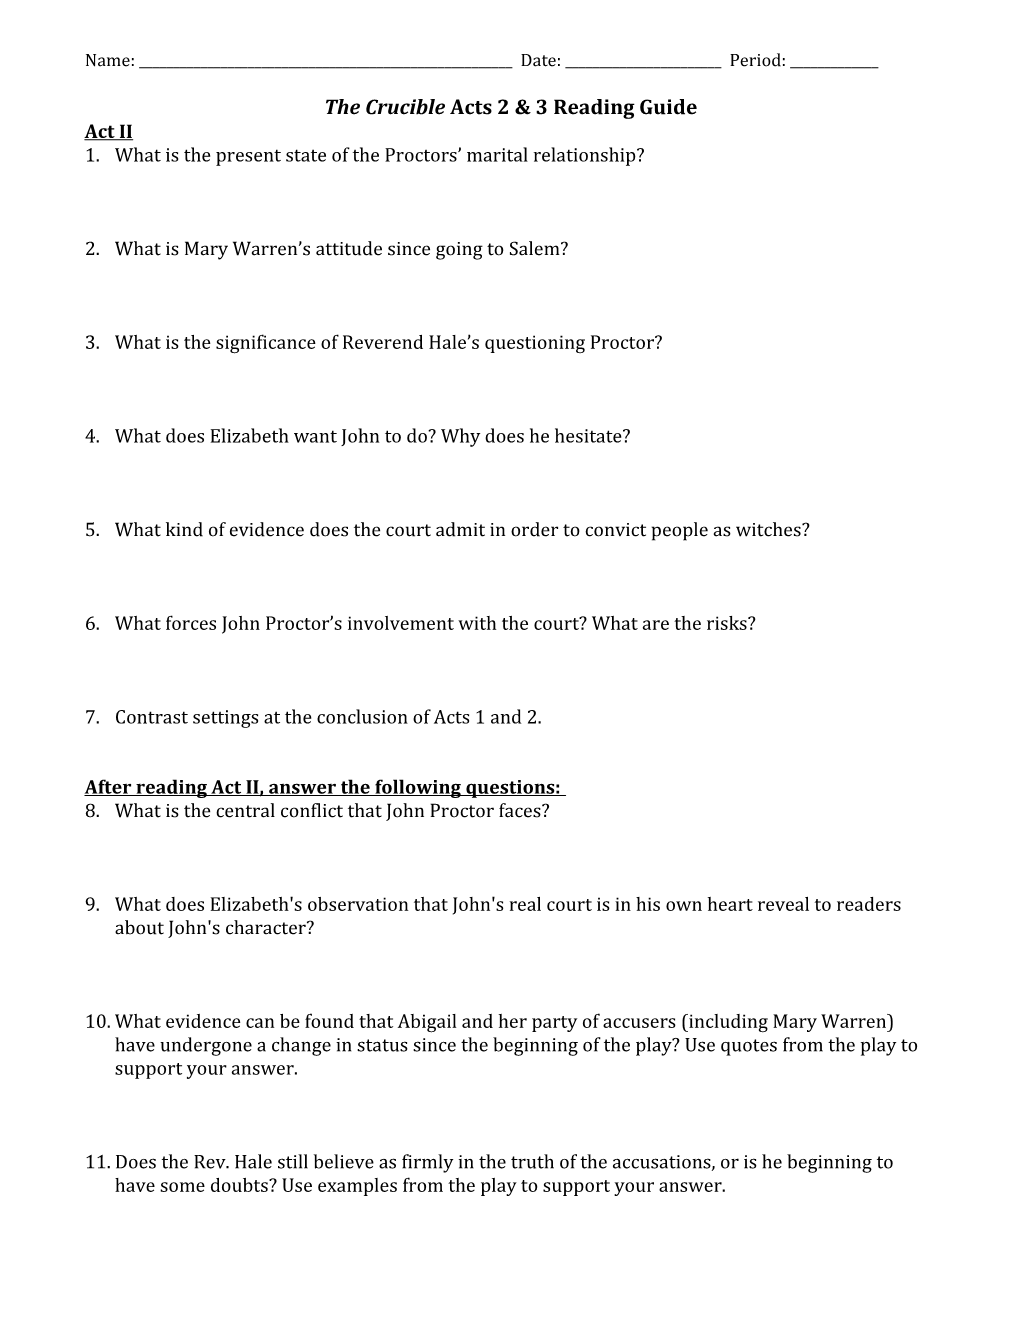 The Crucible Acts 2, 3, 4 Discussion Questions